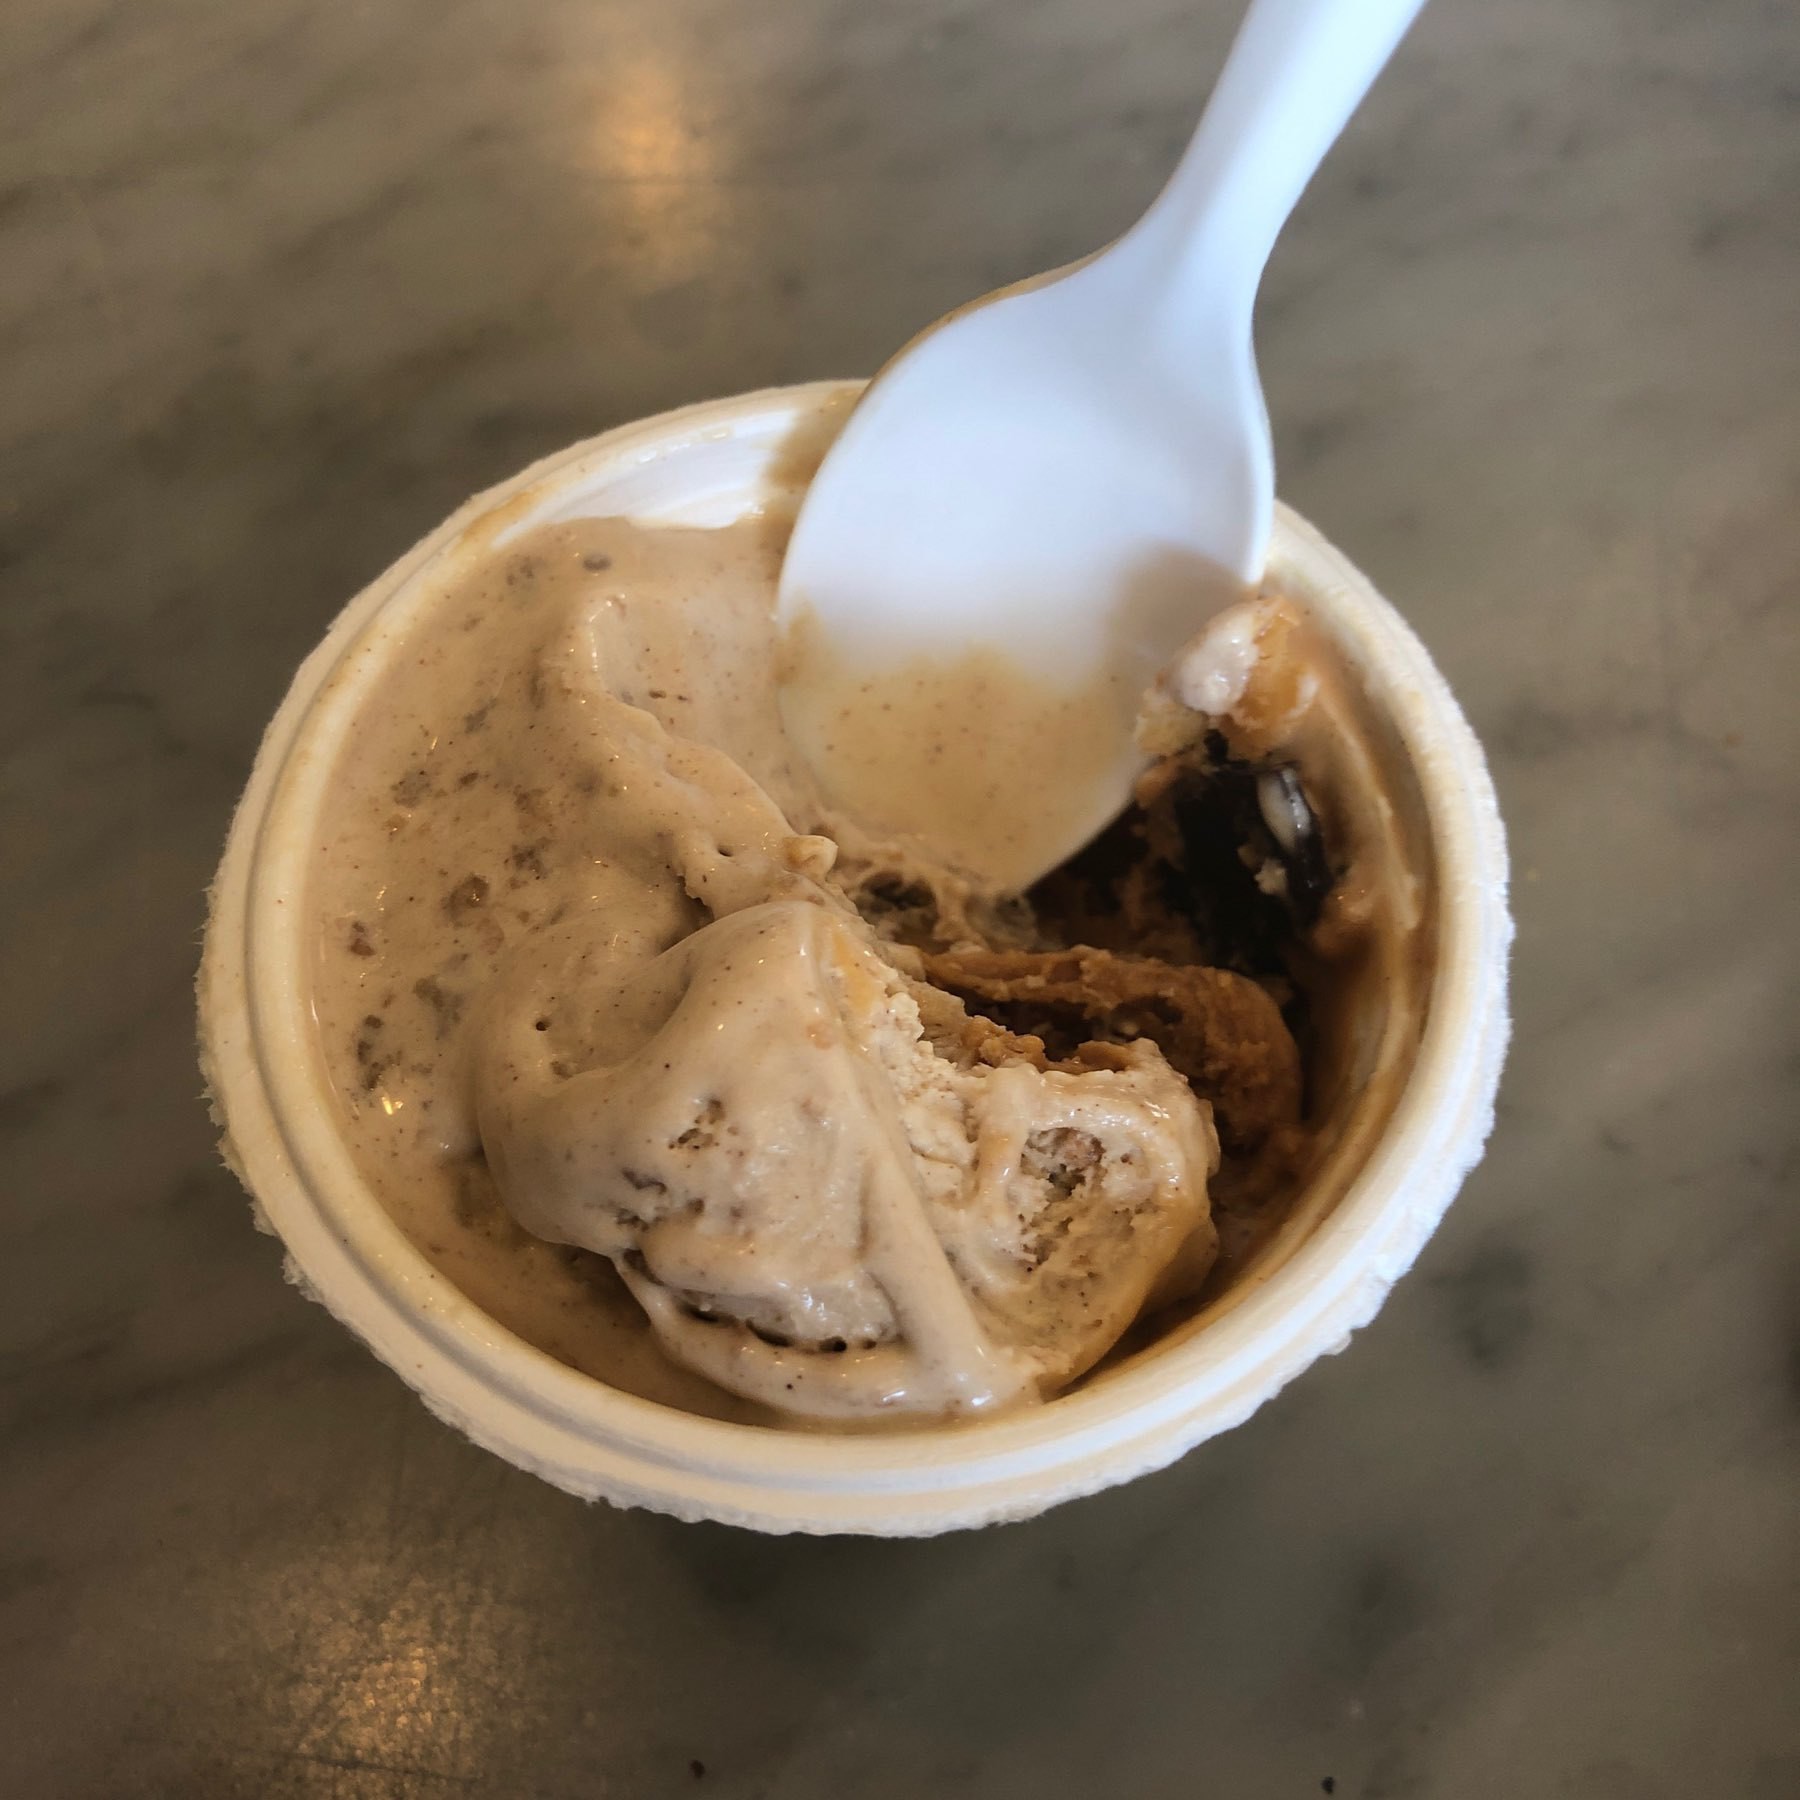 Ice Cream from Ample Hills